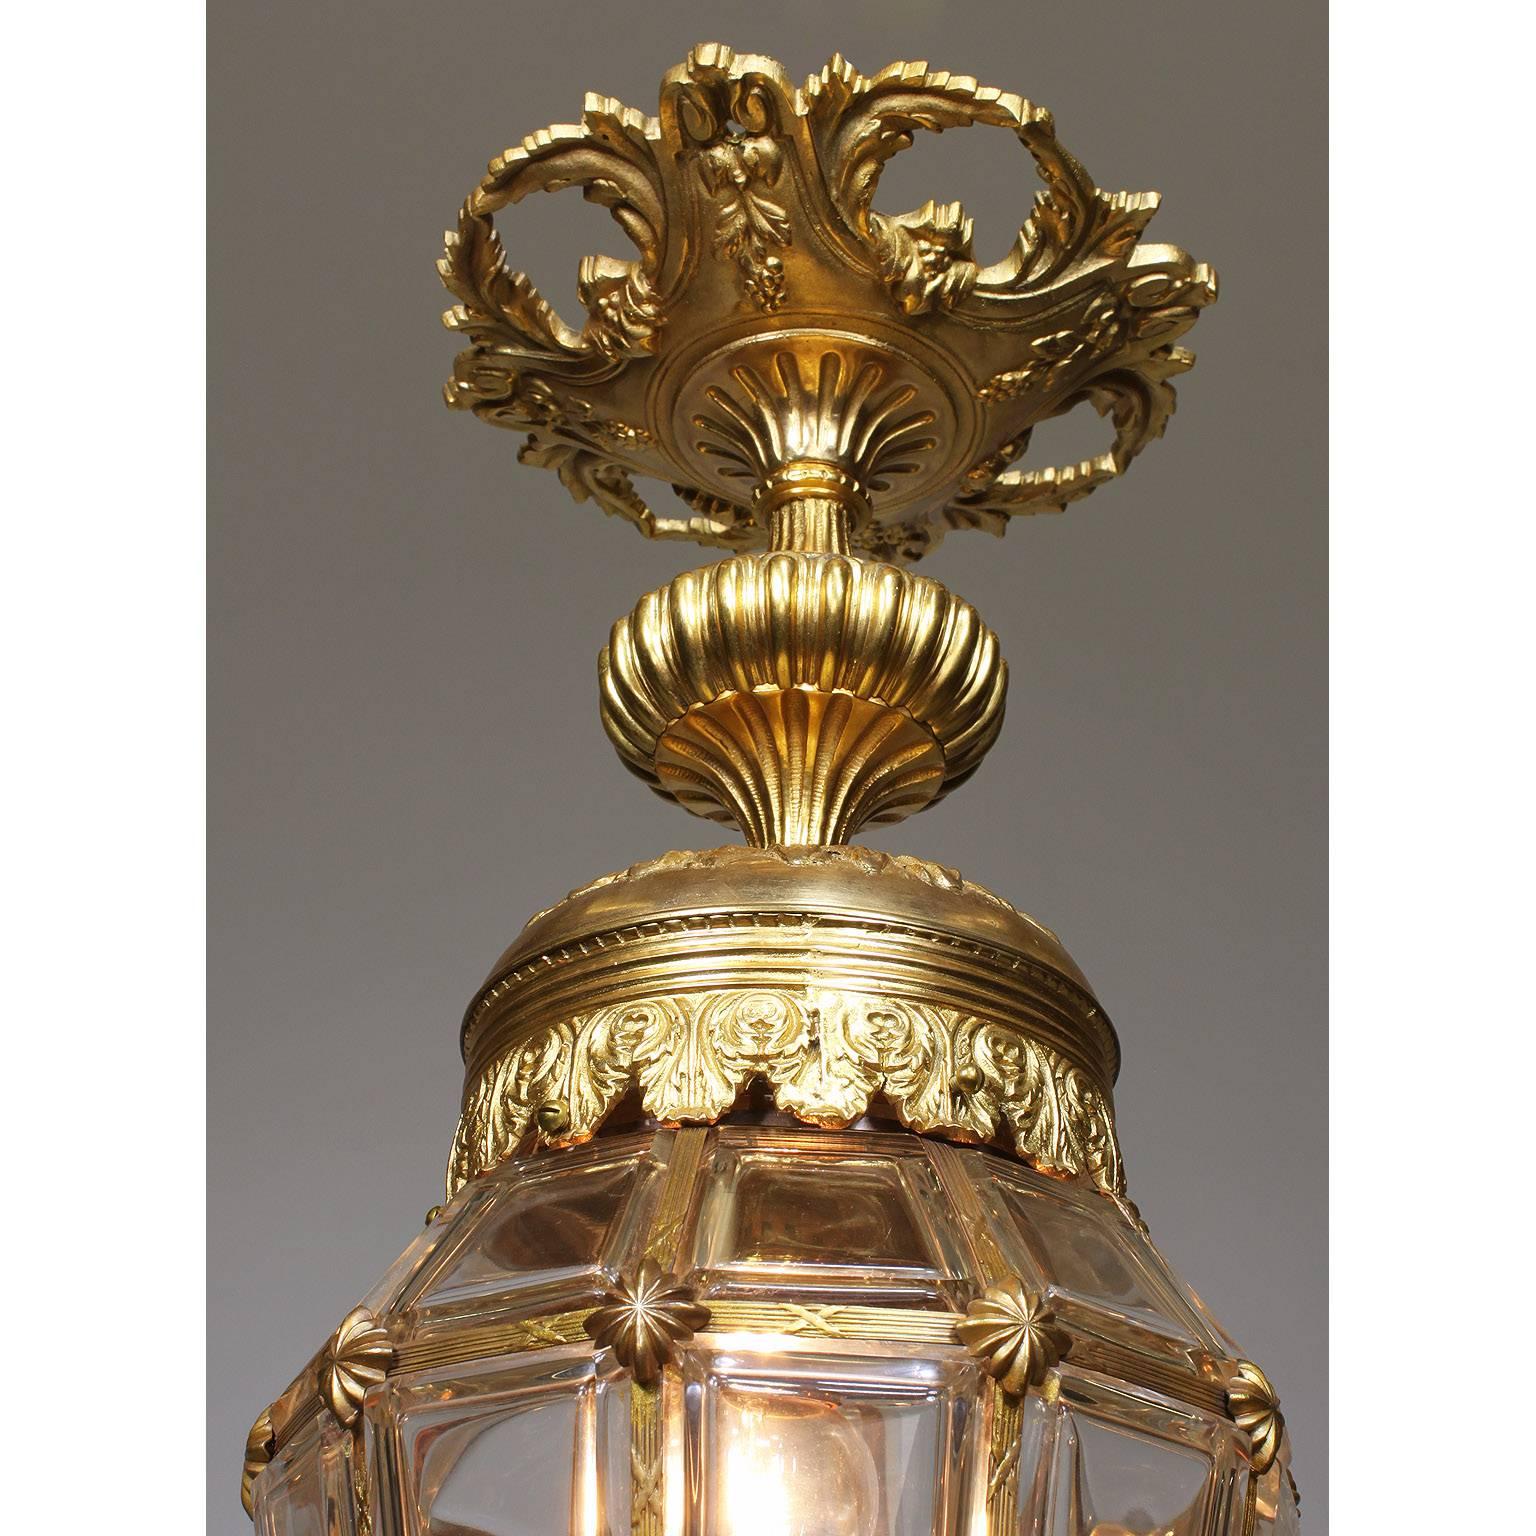 A fine and charming French Louis XIV style early 20th century gilt bronze and molded glass 